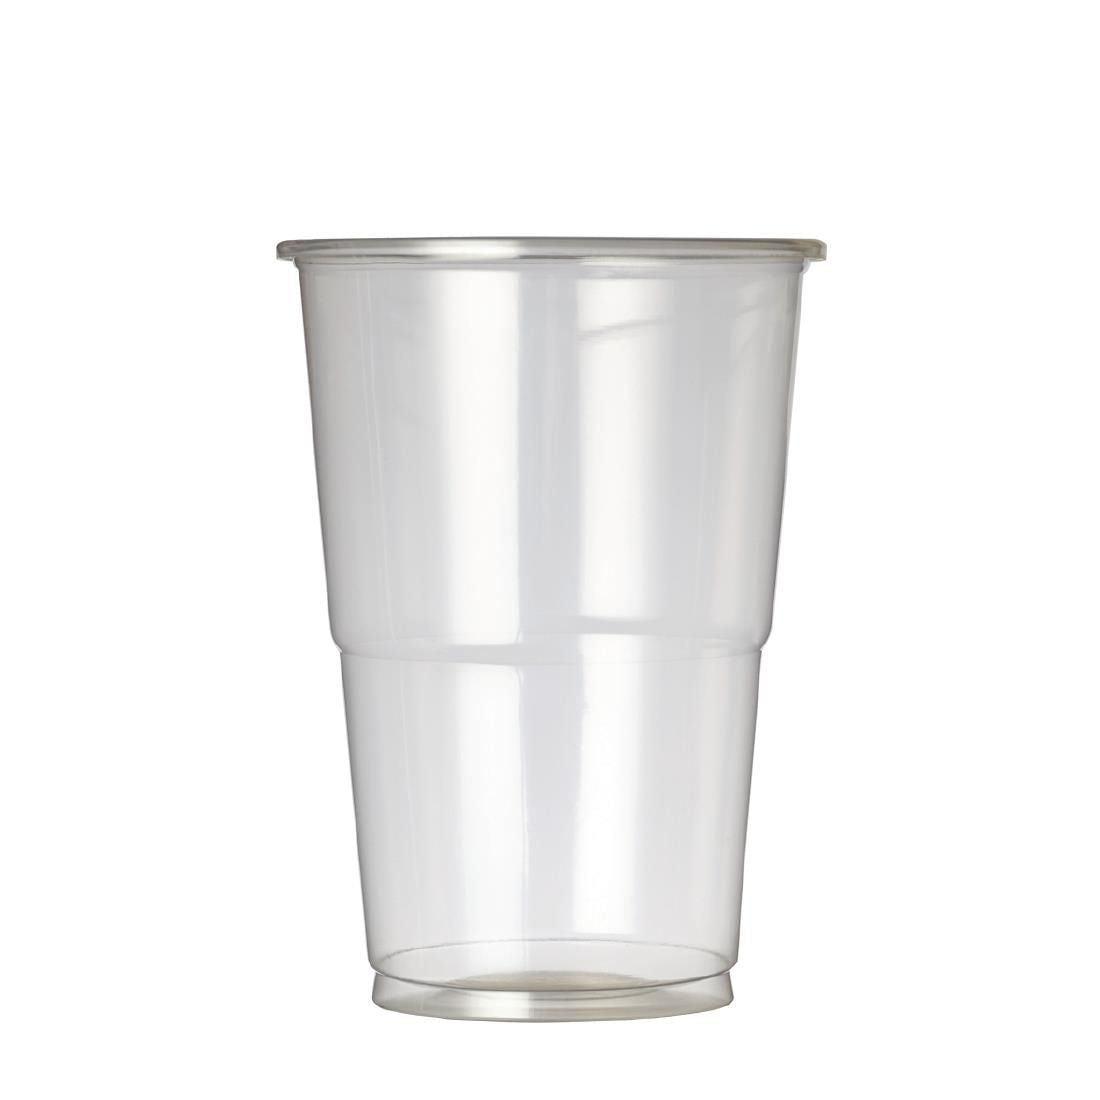 eGreen Premium Flexy-Glass Recyclable Half Pint To Brim CE Marked 284ml / 10oz (Pack of 1000) JD Catering Equipment Solutions Ltd